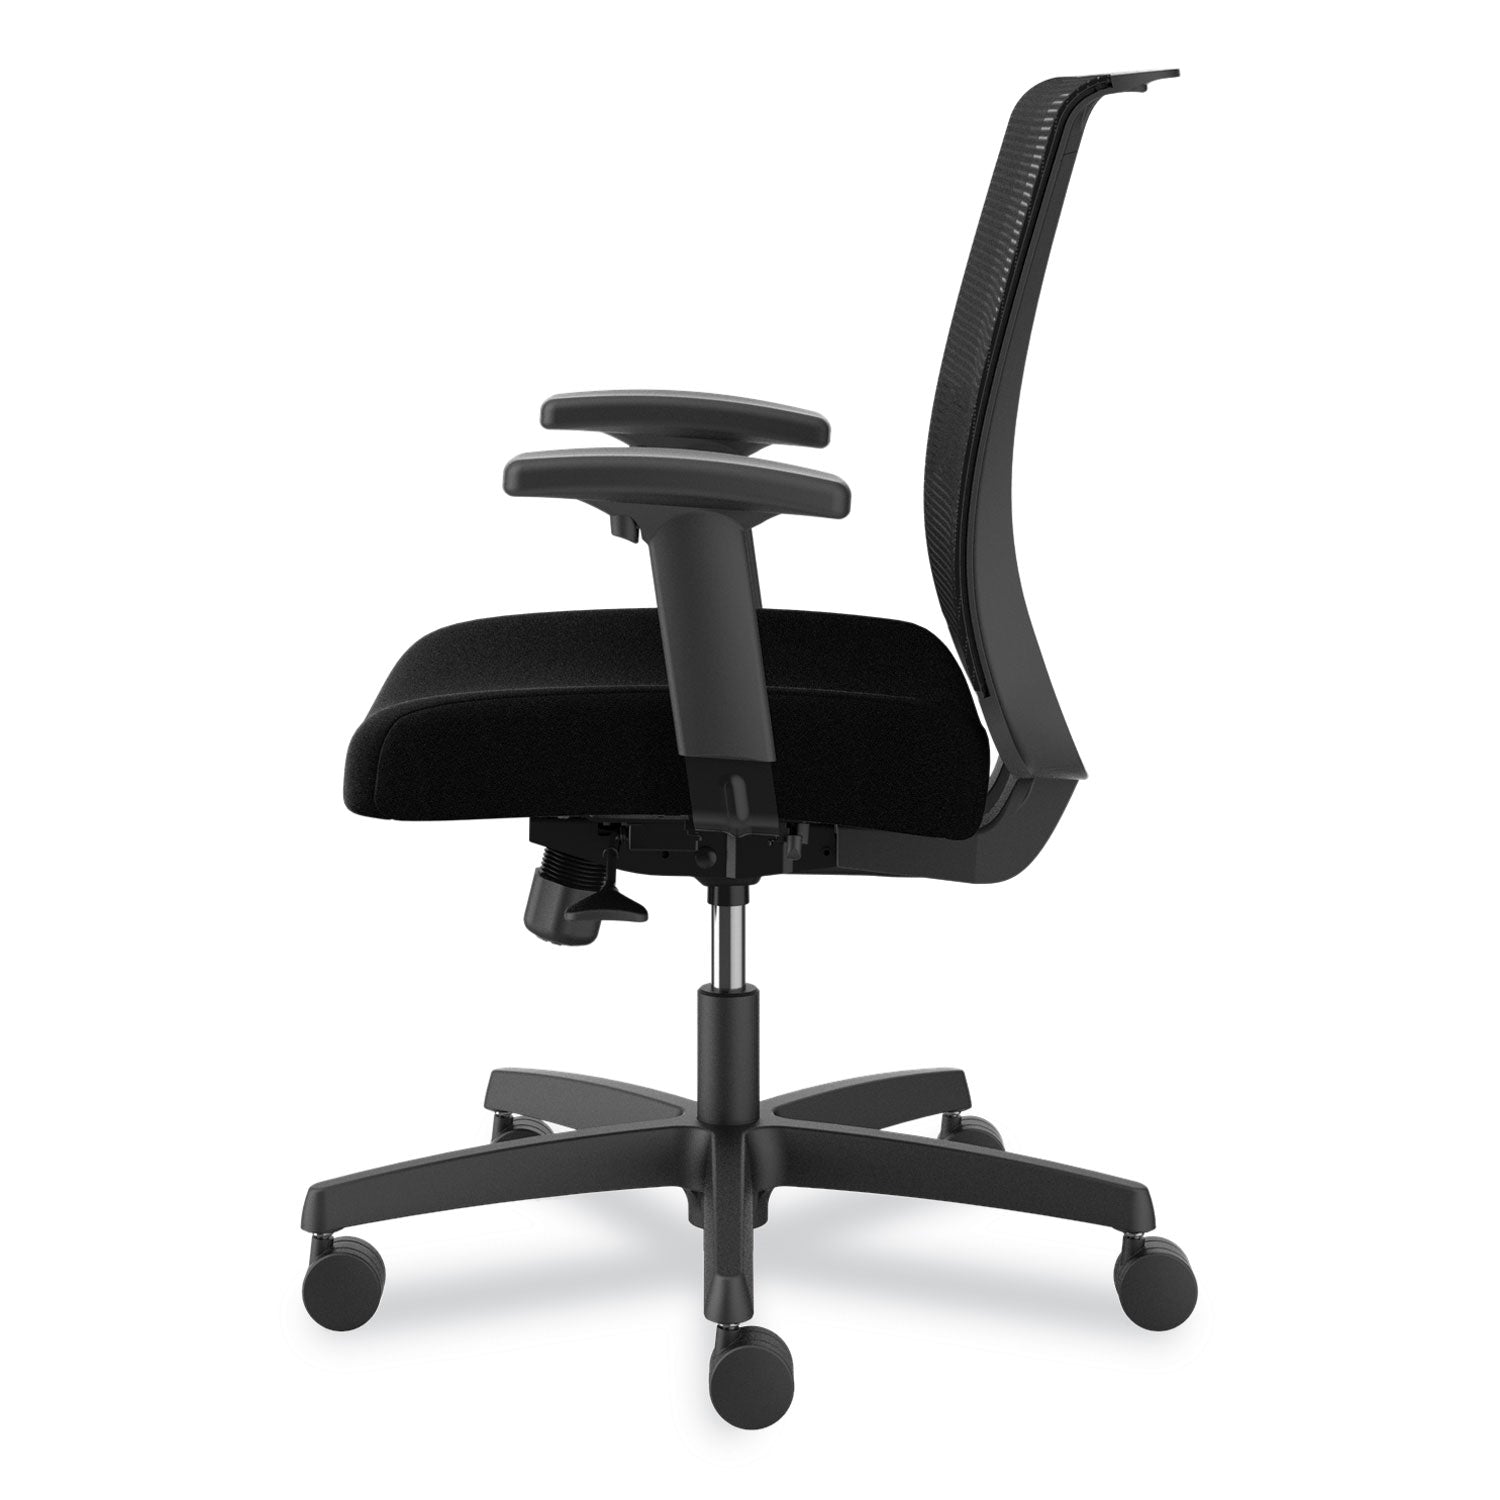 convergence-mid-back-task-chair-swivel-tilt-up-to-275lb-165-to-21-seat-ht-black-seat-back-frameships-in-7-10-bus-days_honcmy1acu10 - 4